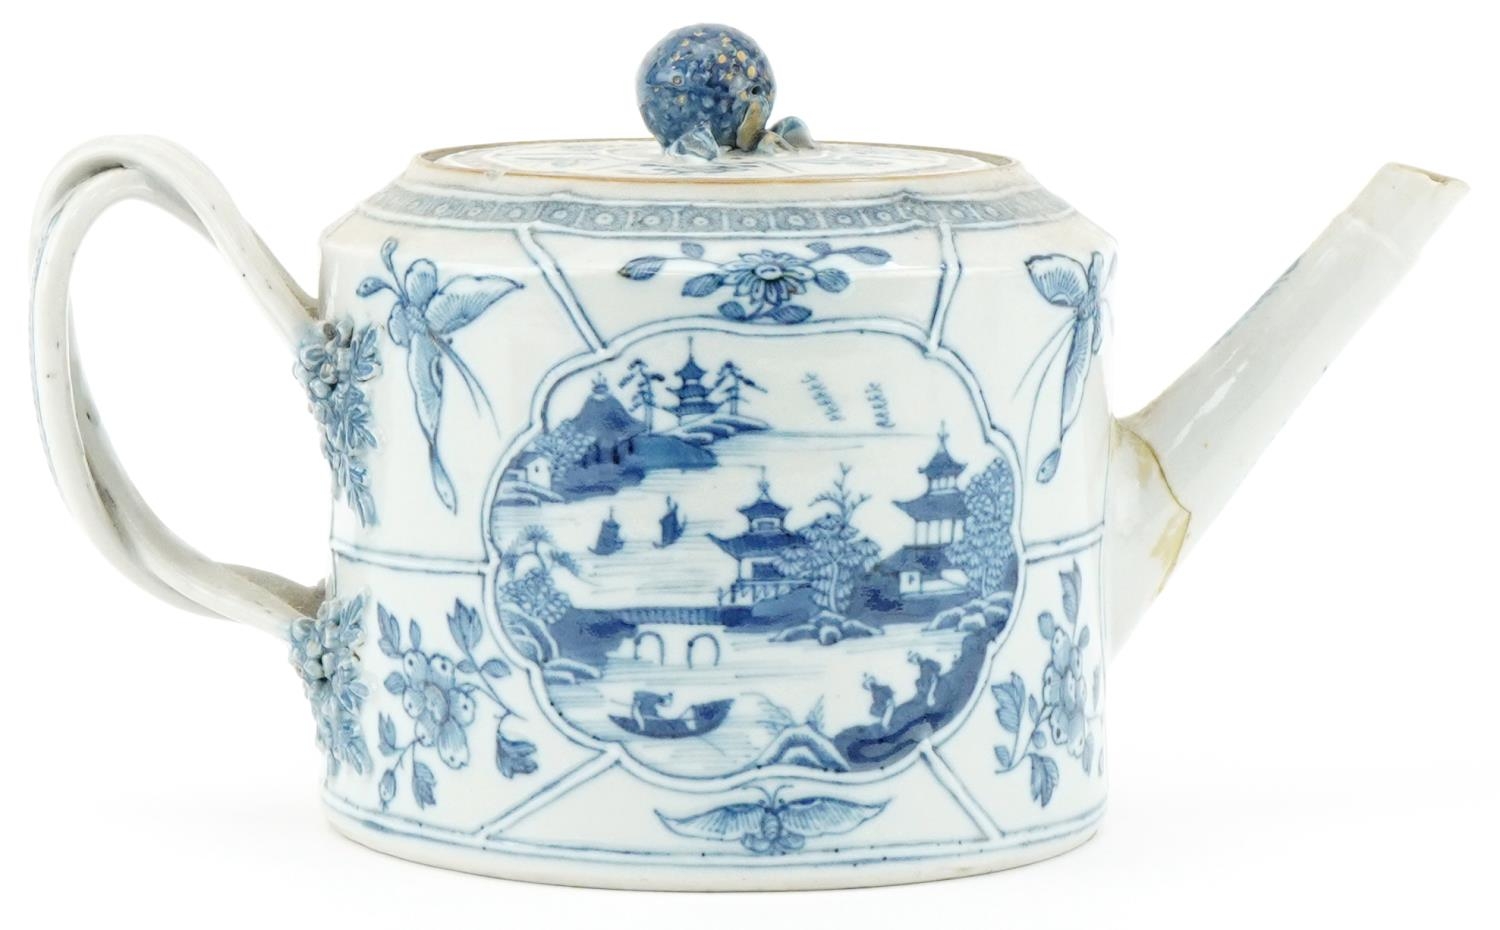 18th century Chinese porcelain teapot hand painted in the Willow pattern, 14cm high - Image 4 of 7